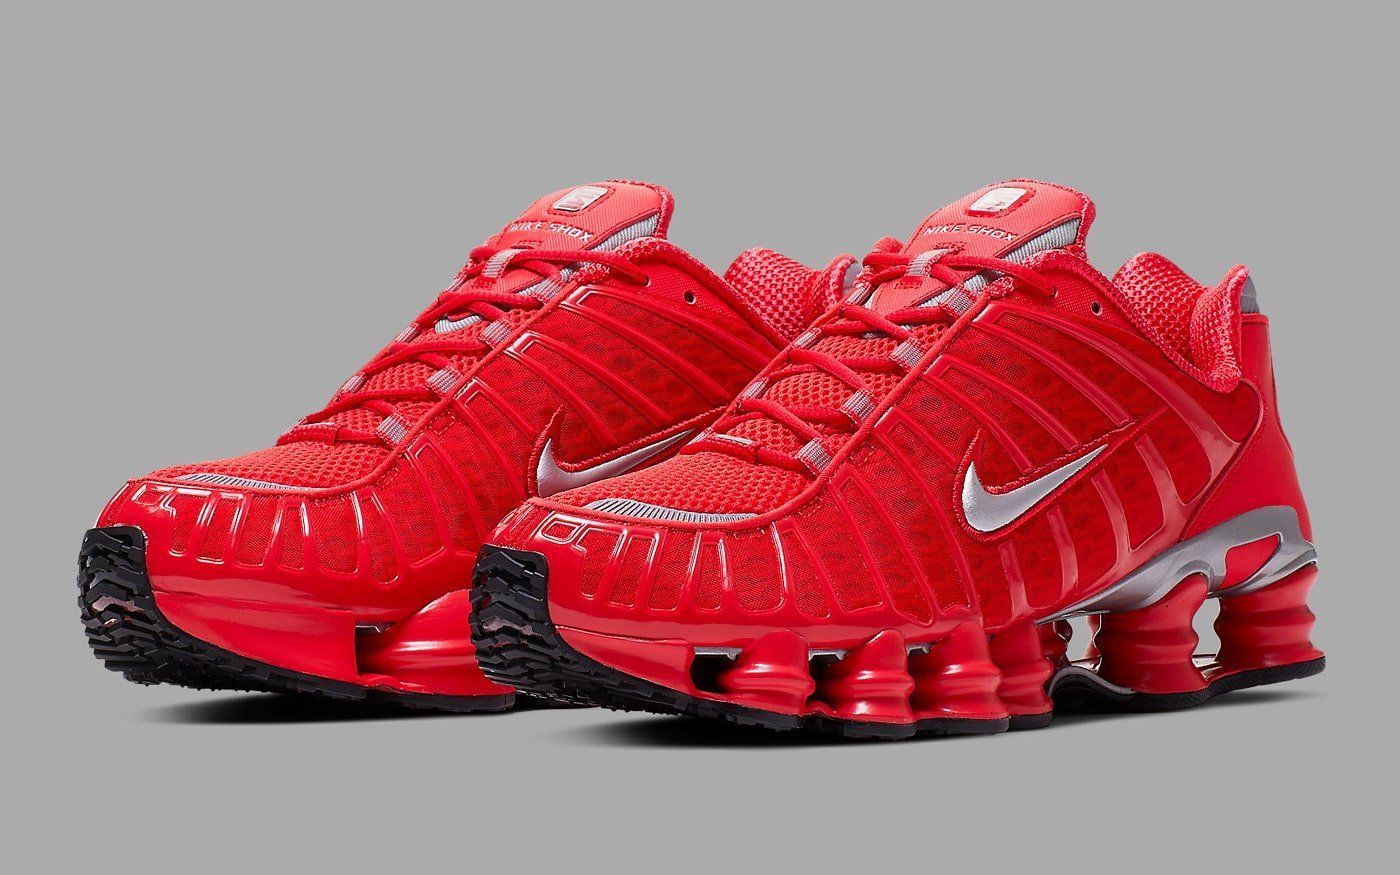 The Nike Shox TL Set to Release a Wild Red Rendition | HOUSE OF HEAT